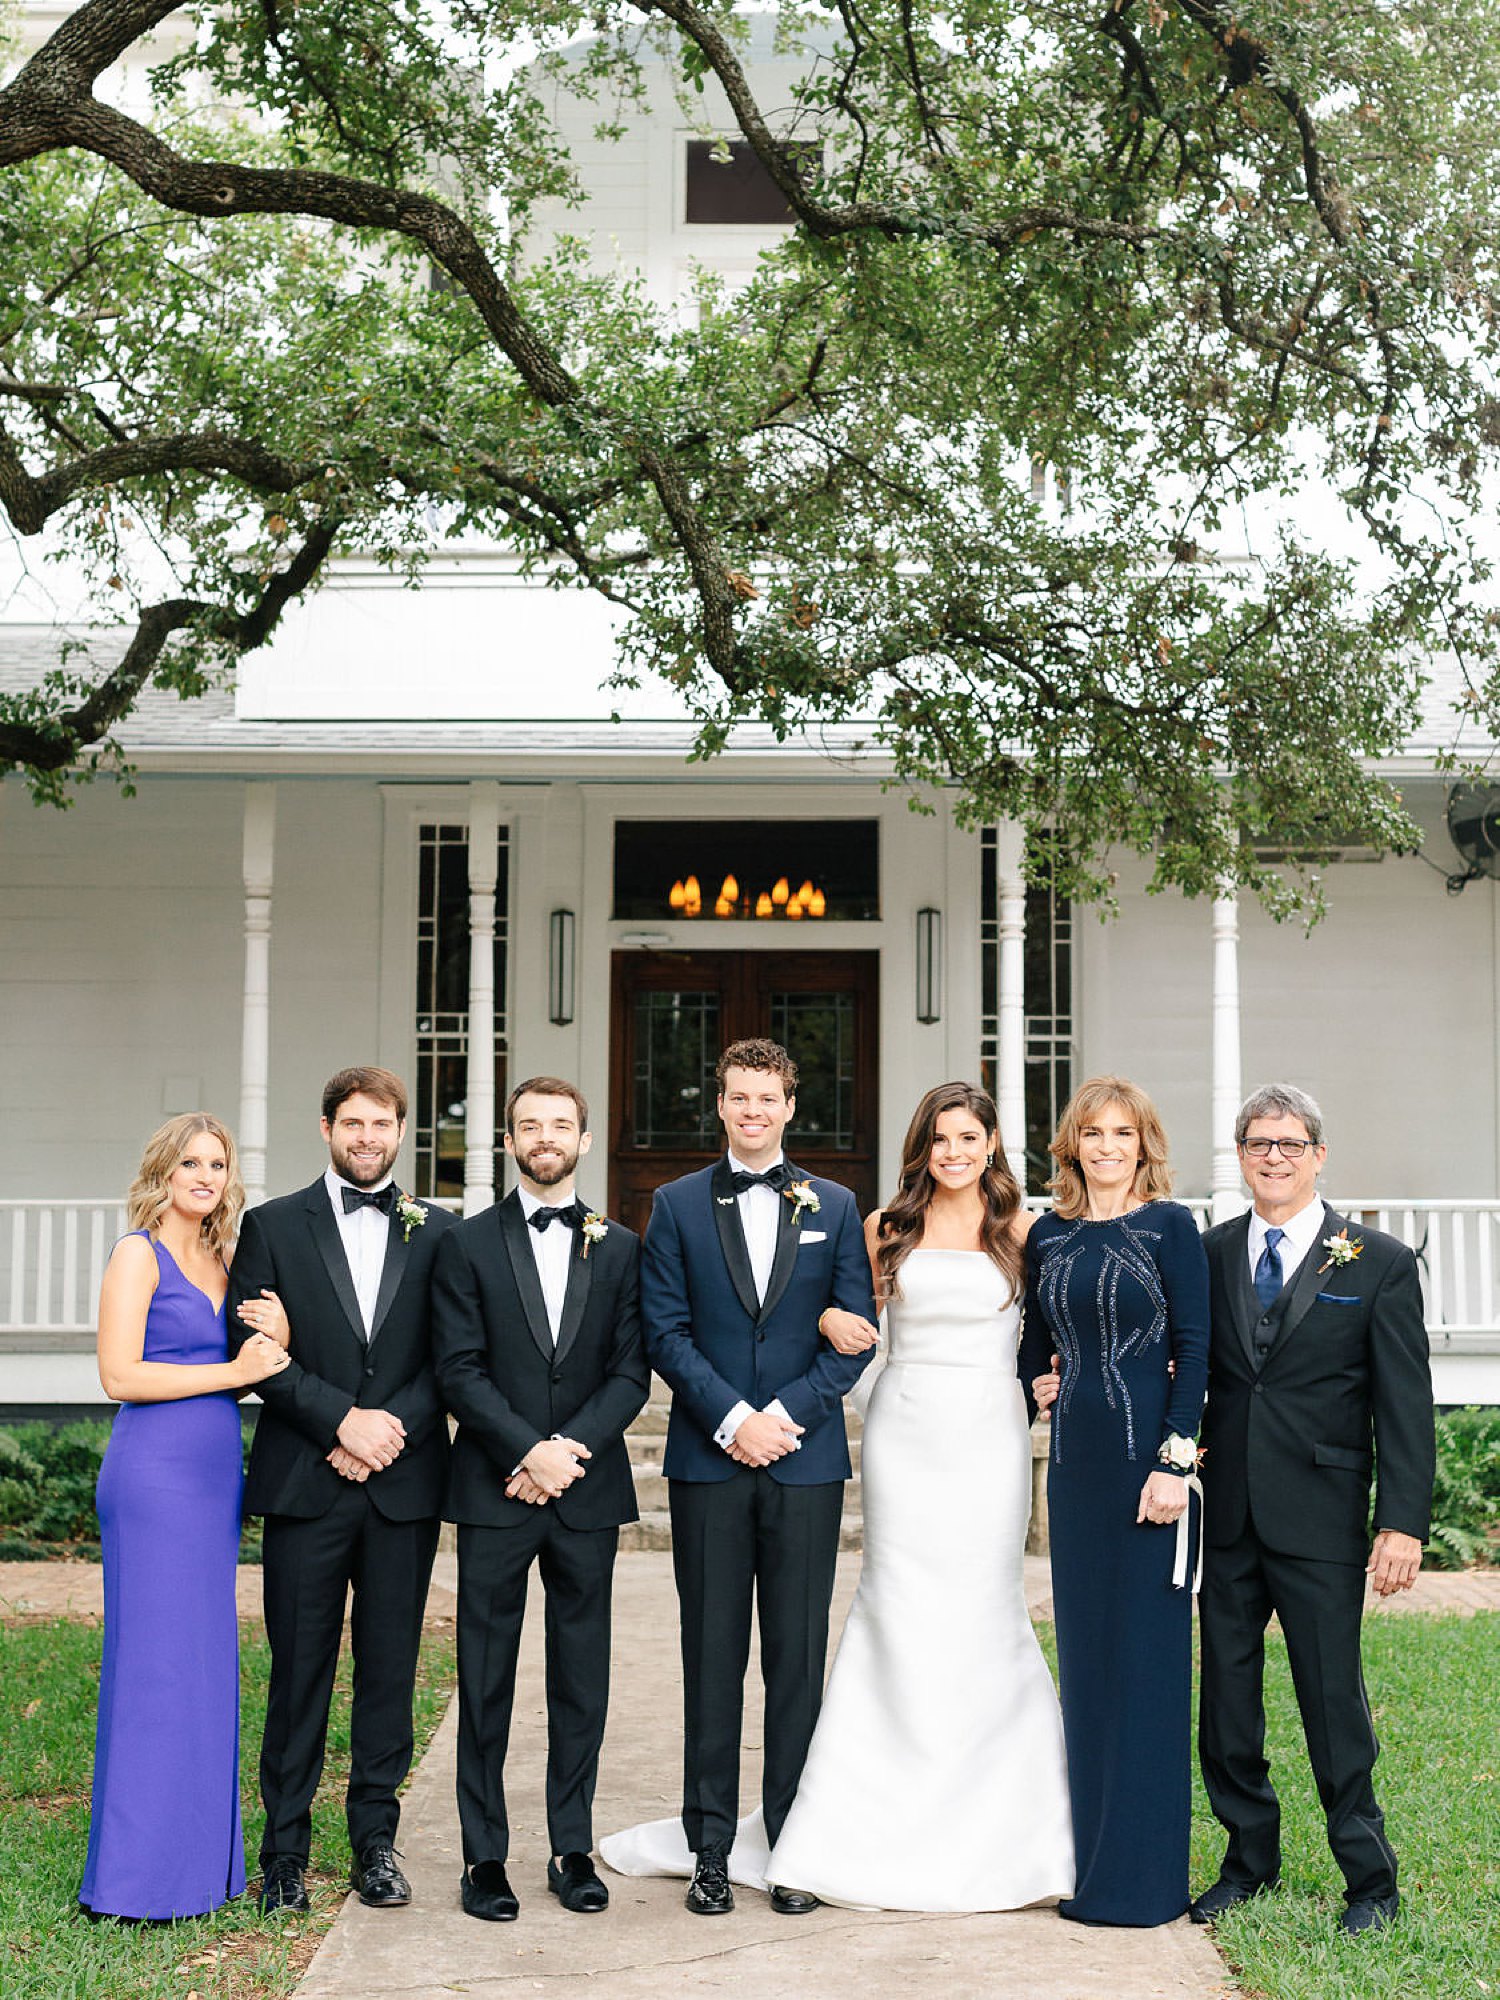 Bride groom and family posing on wedding day outside white house austin texas